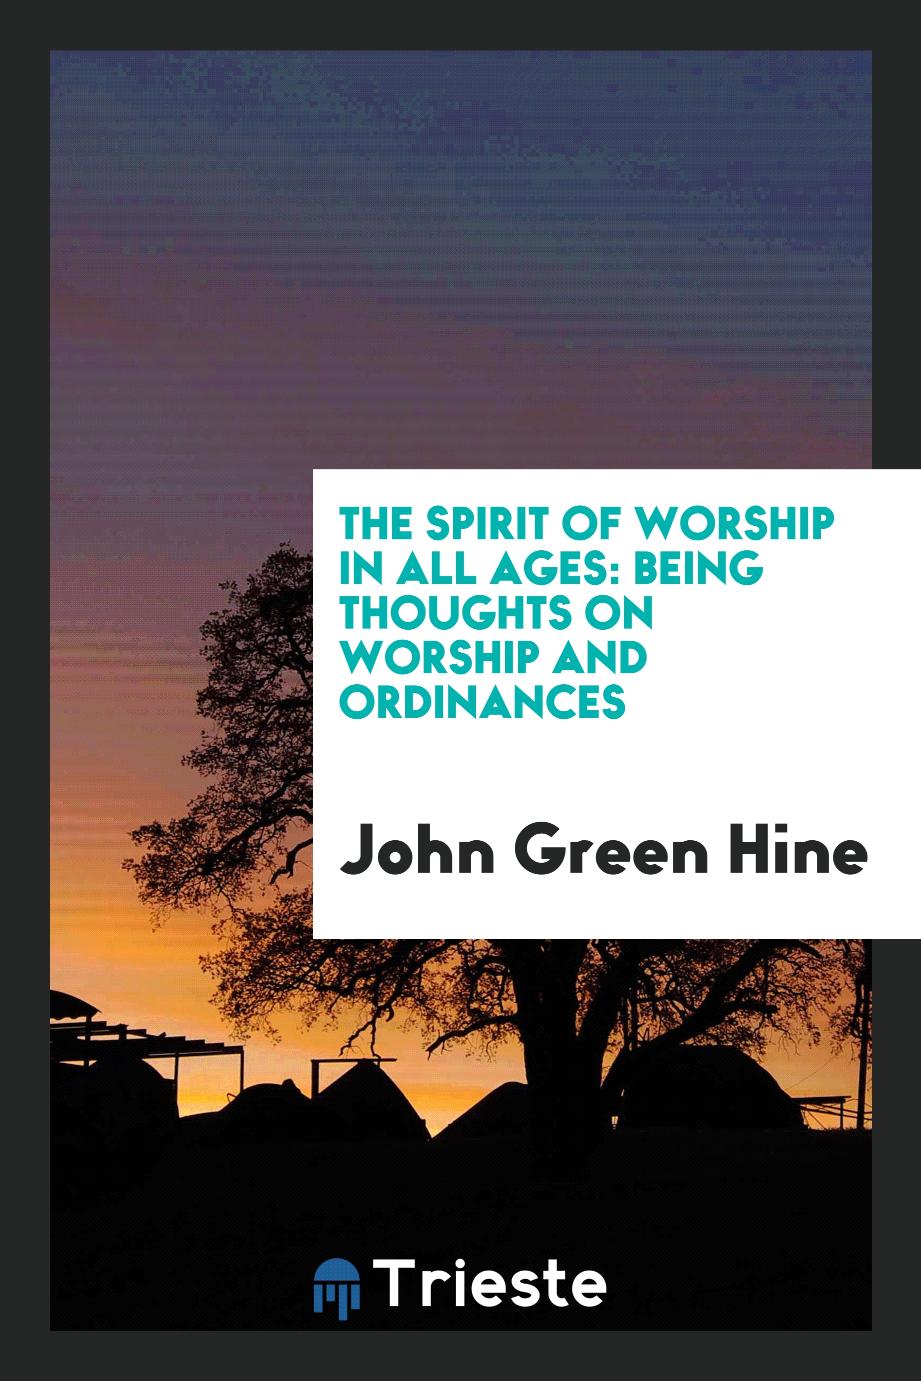 The Spirit of Worship in All Ages: Being Thoughts on Worship and Ordinances